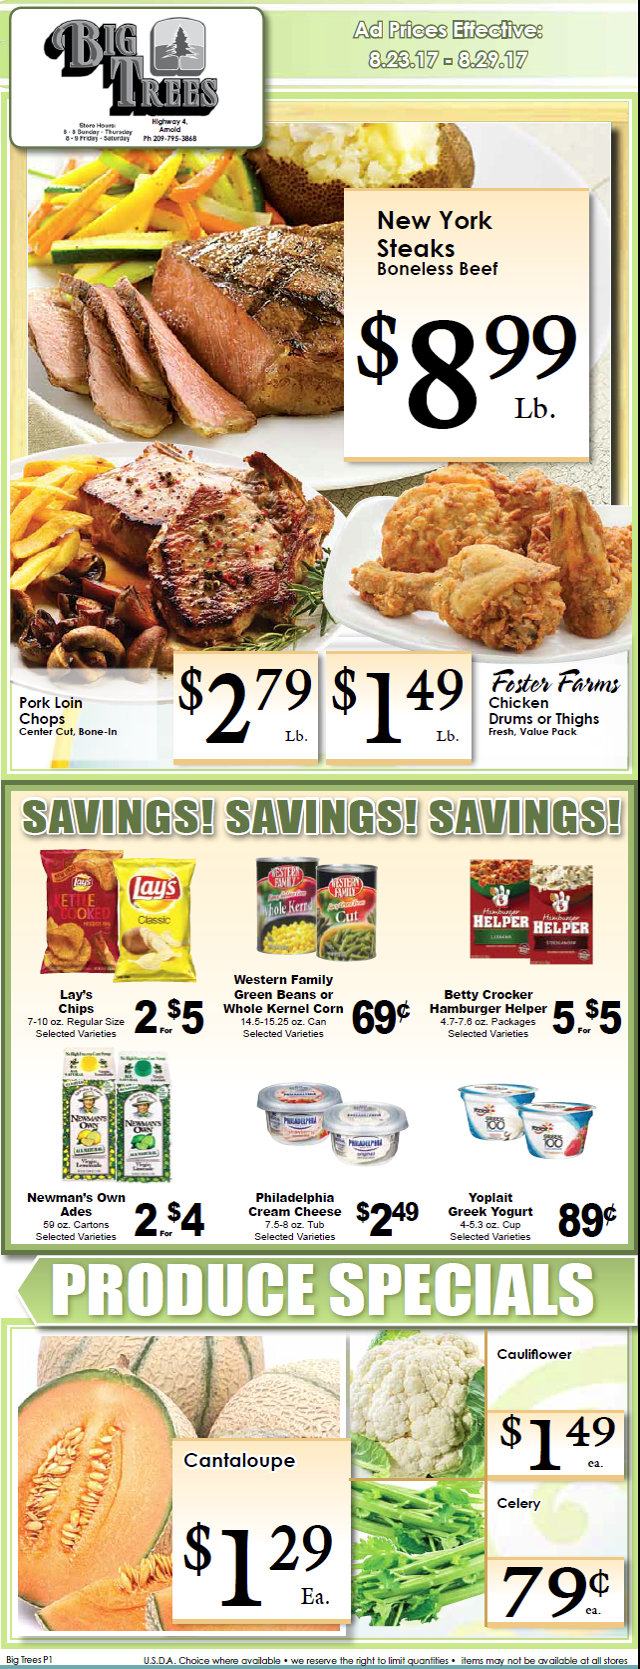 Big Trees Market Weekly Ad & Specials Through August 29th